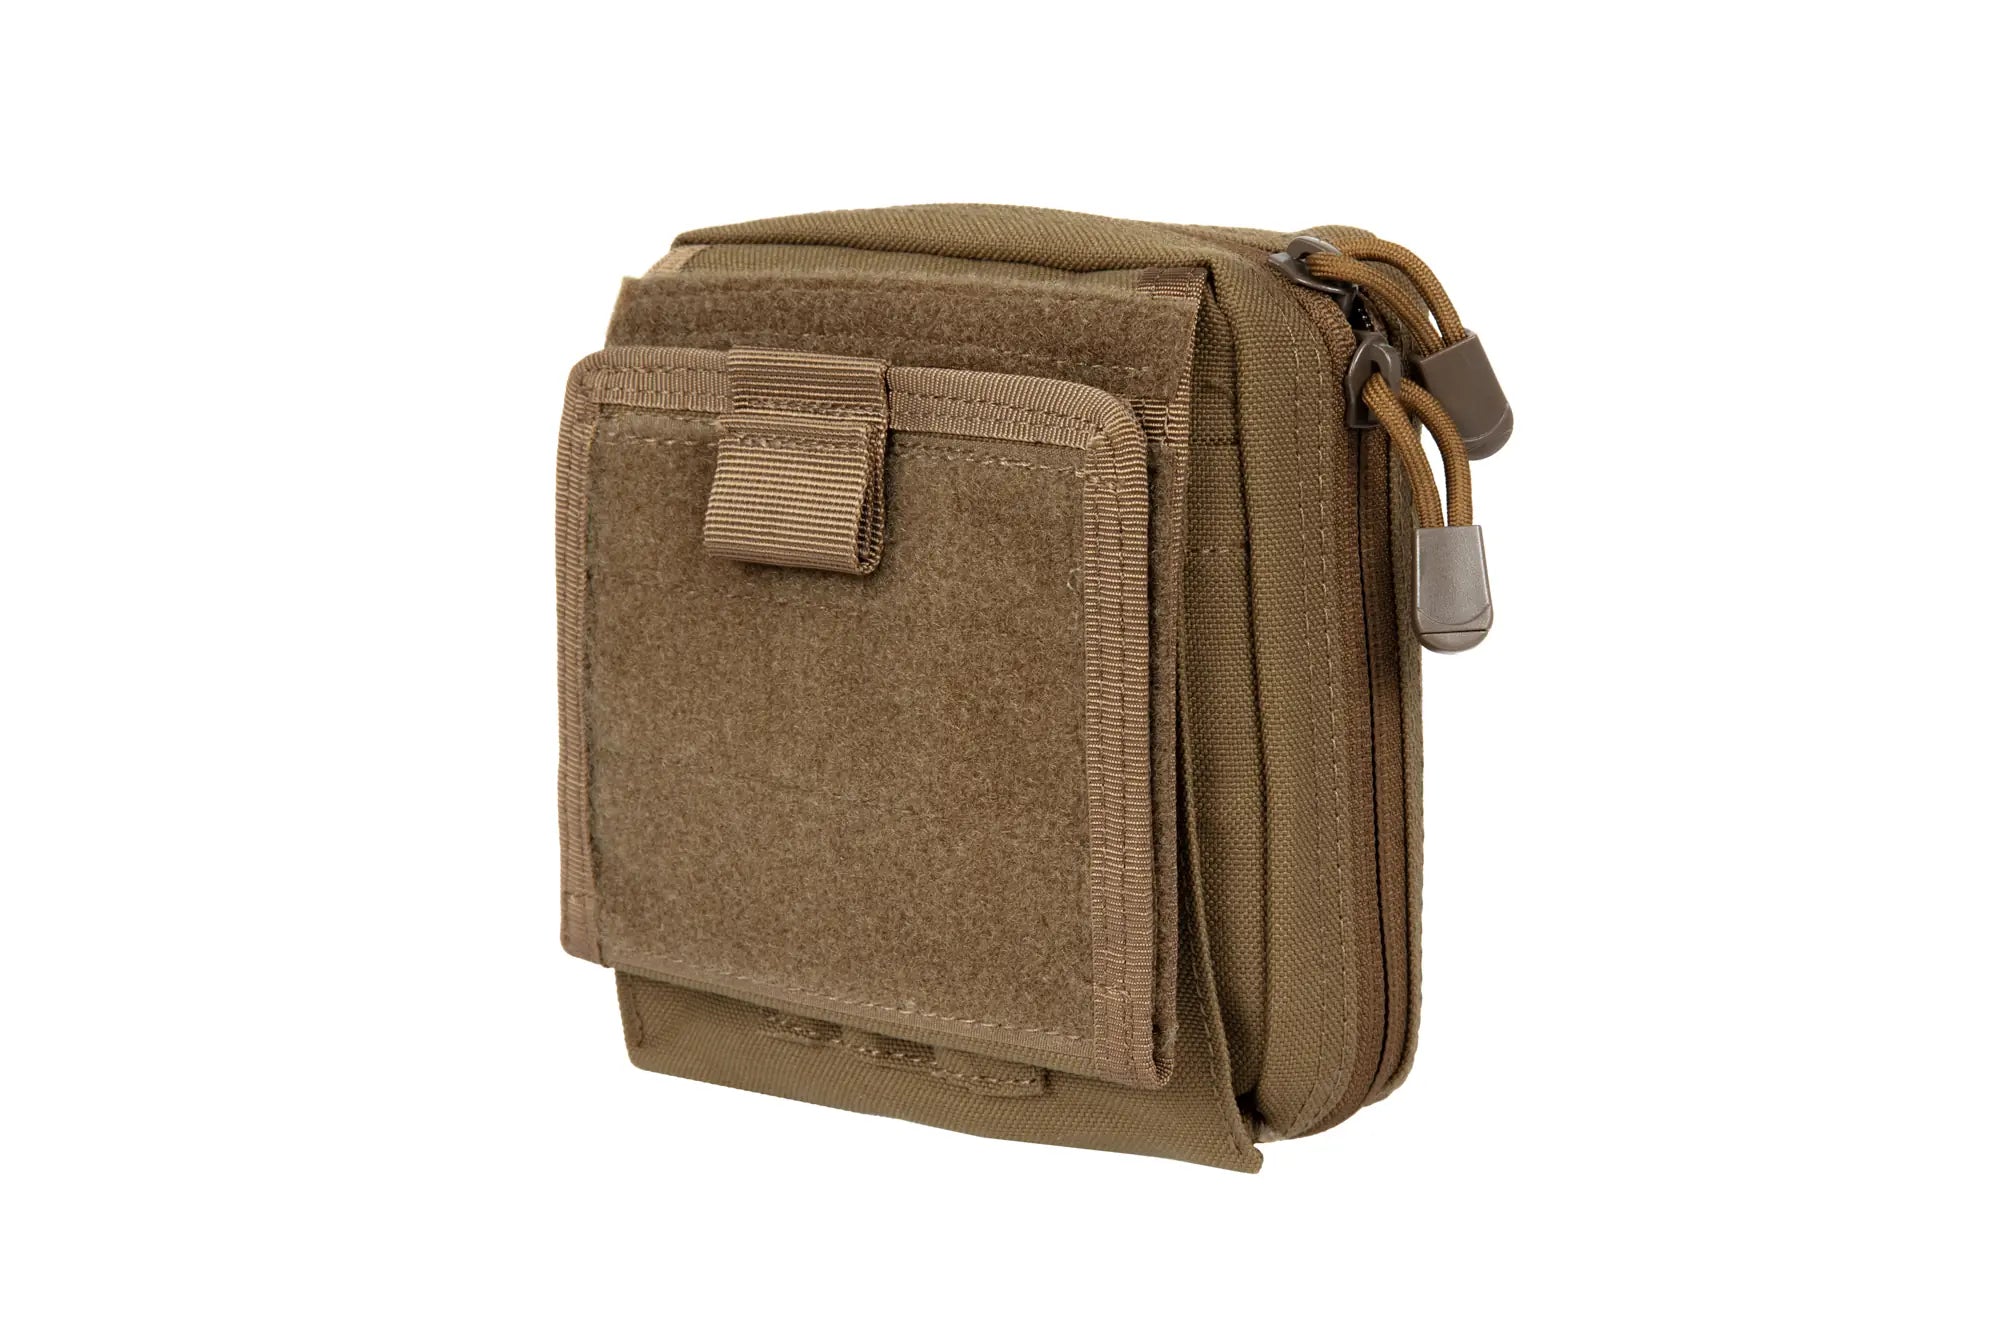 Administrative Panel with Map Pouch - Tan